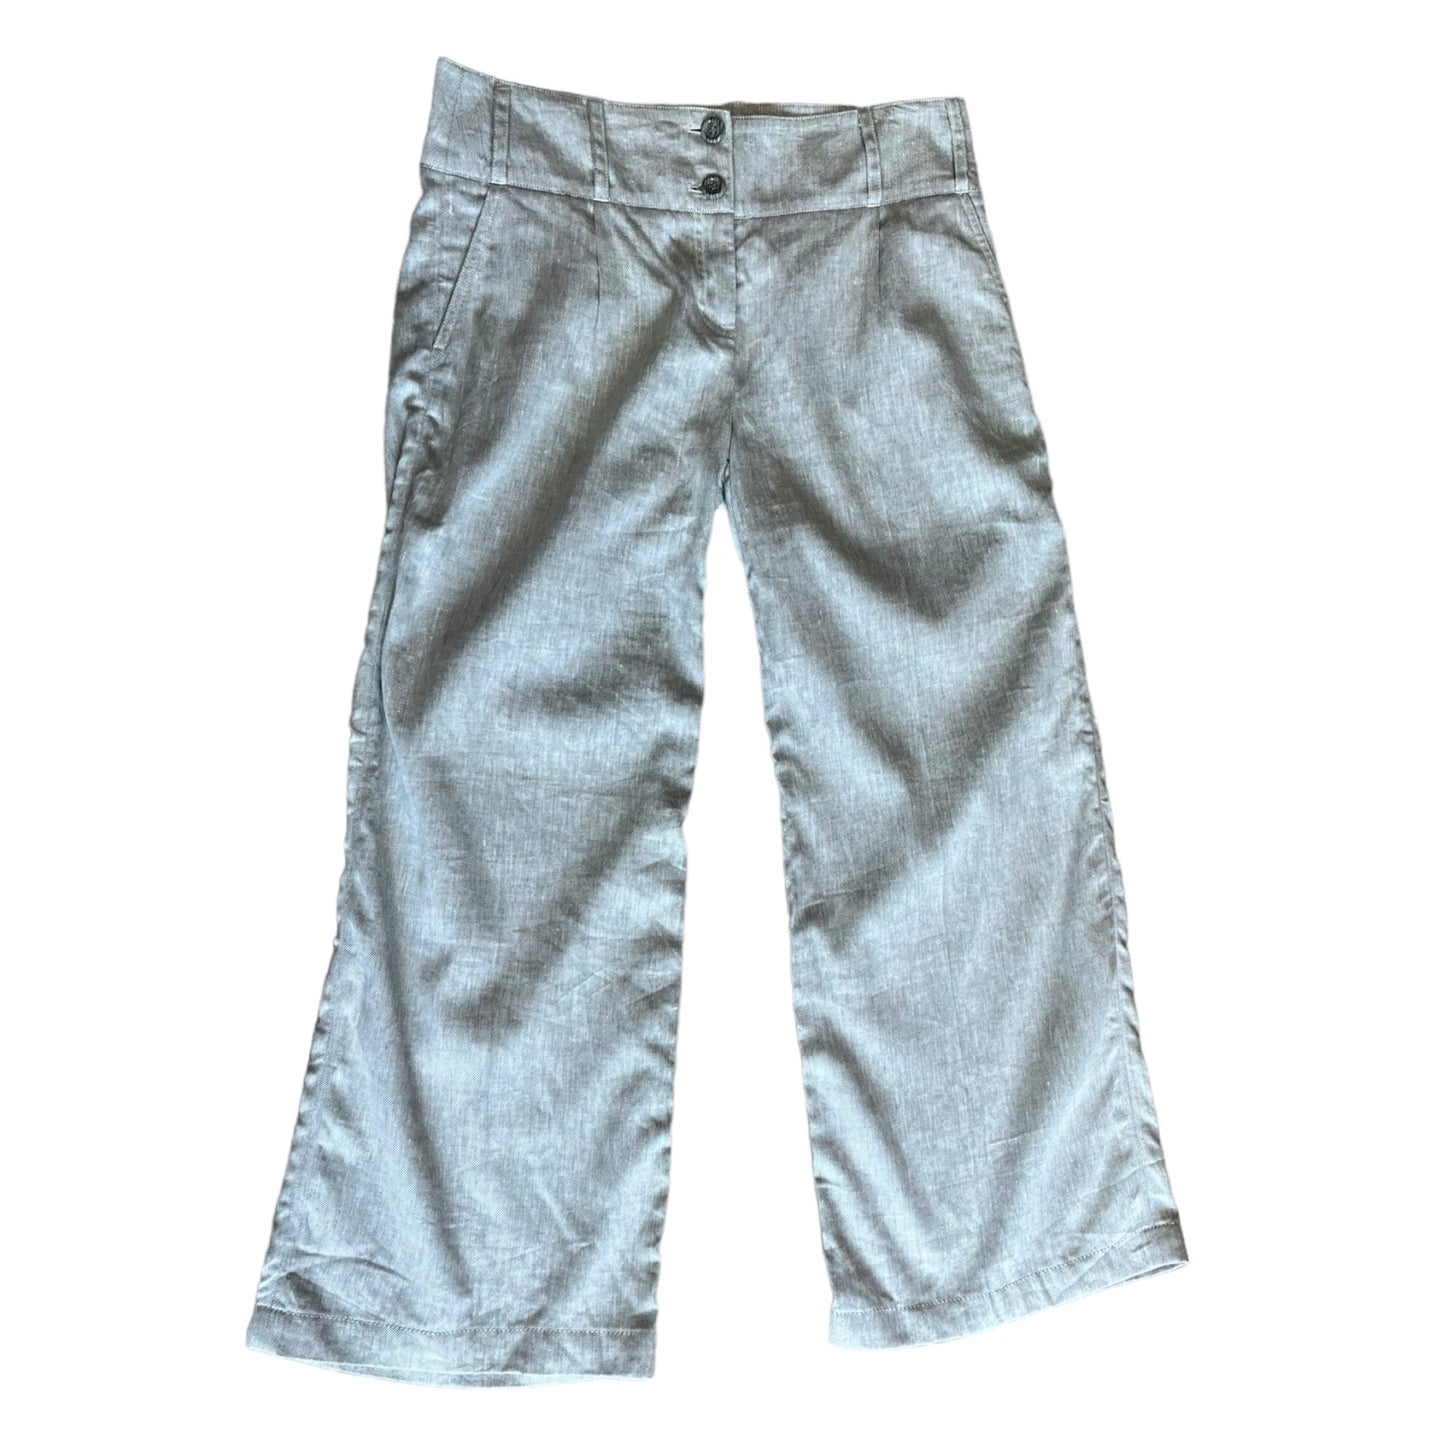 St Martins Grey Linen and Cotton Trousers - 12